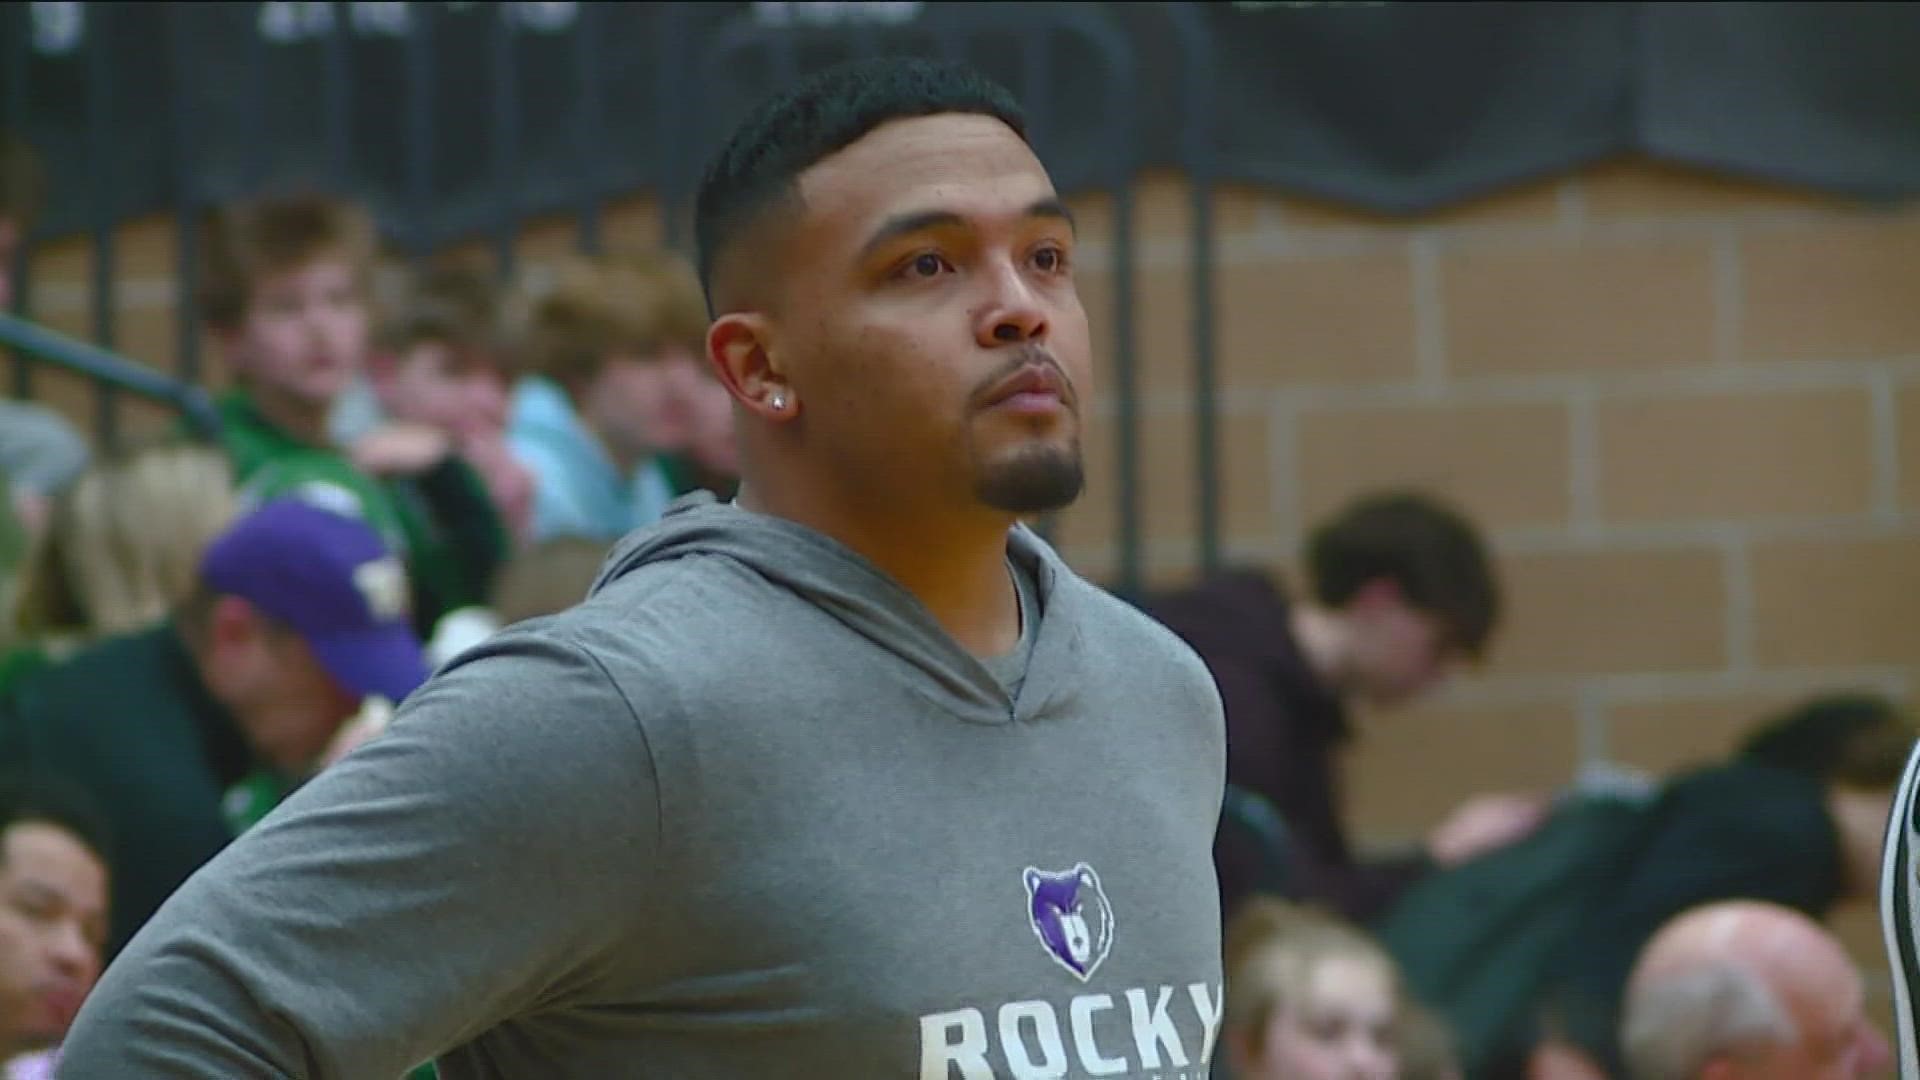 The Lapwai native played in nearly 130 games for College of Idaho. Last month, Miles-Williams became the youngest head coach in the Southern Idaho Conference.